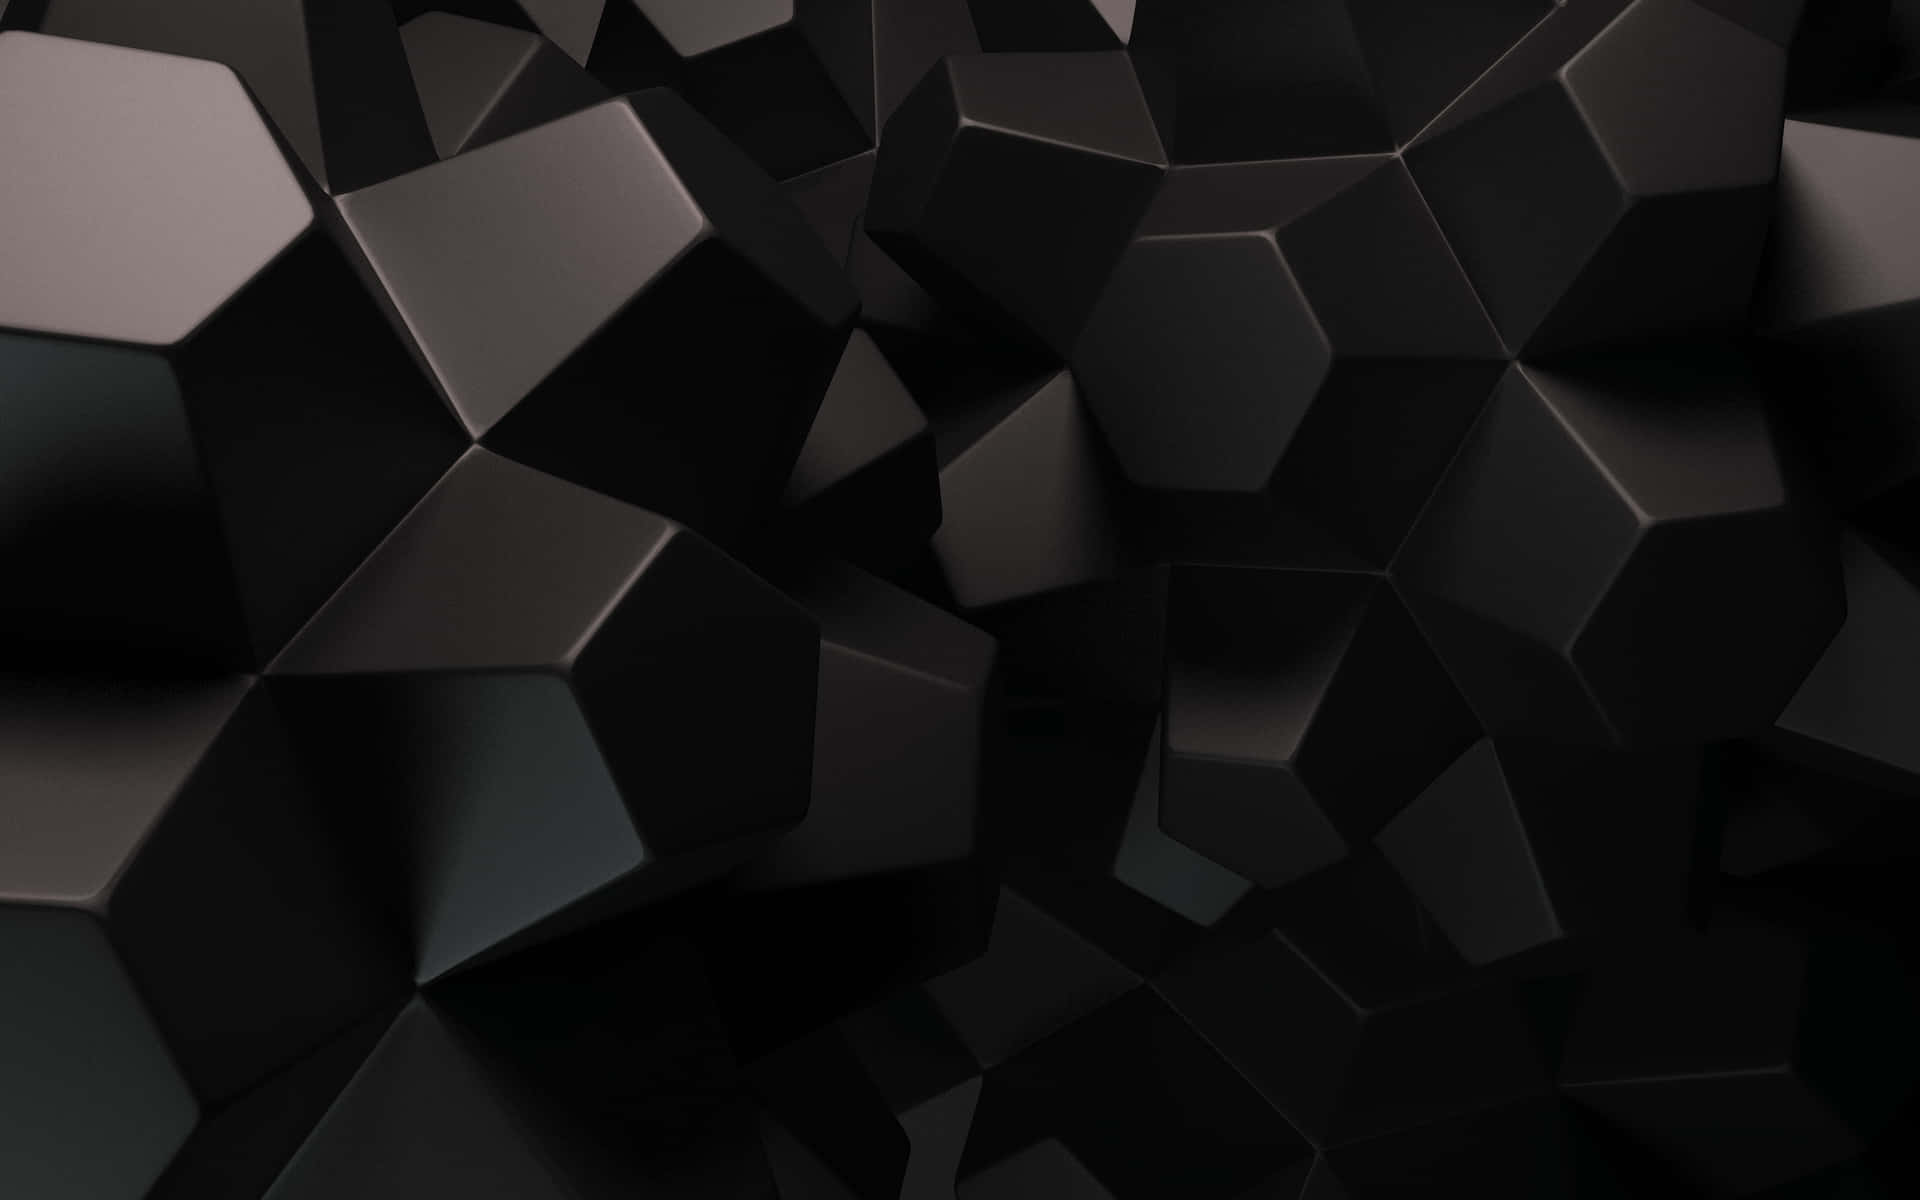 Make your desk setup stand out with a geometric desktop background Wallpaper